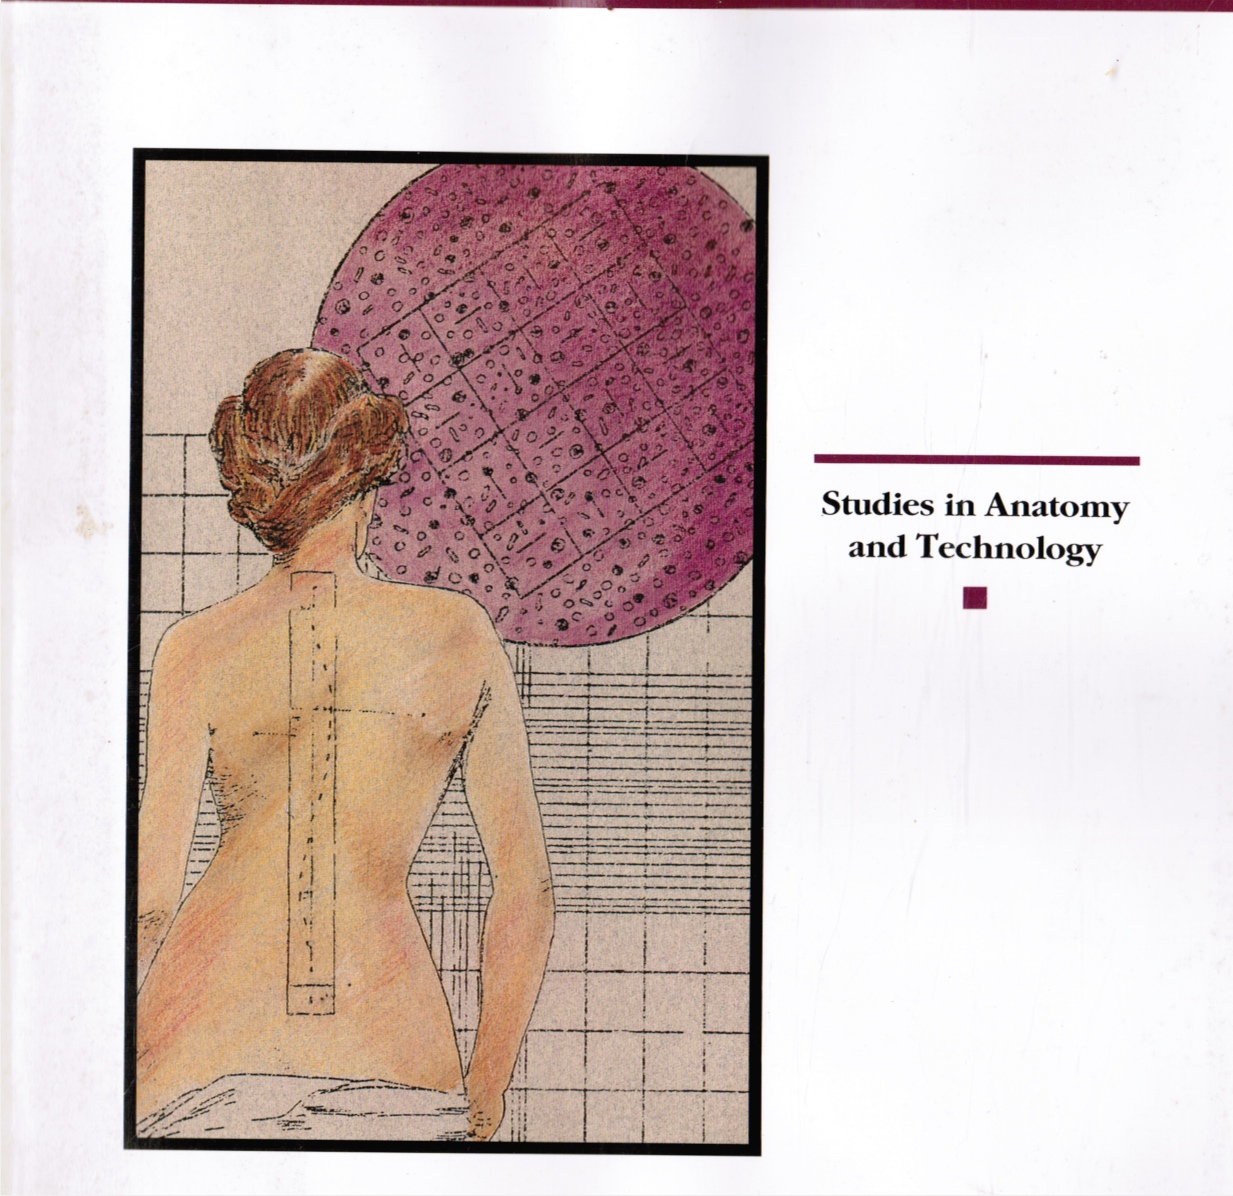 HALLER, JOHN S (EDITOR) - Studies in Anatomy and Technology: Caduceus Humanities Journal for Medicine and the Health Sciences